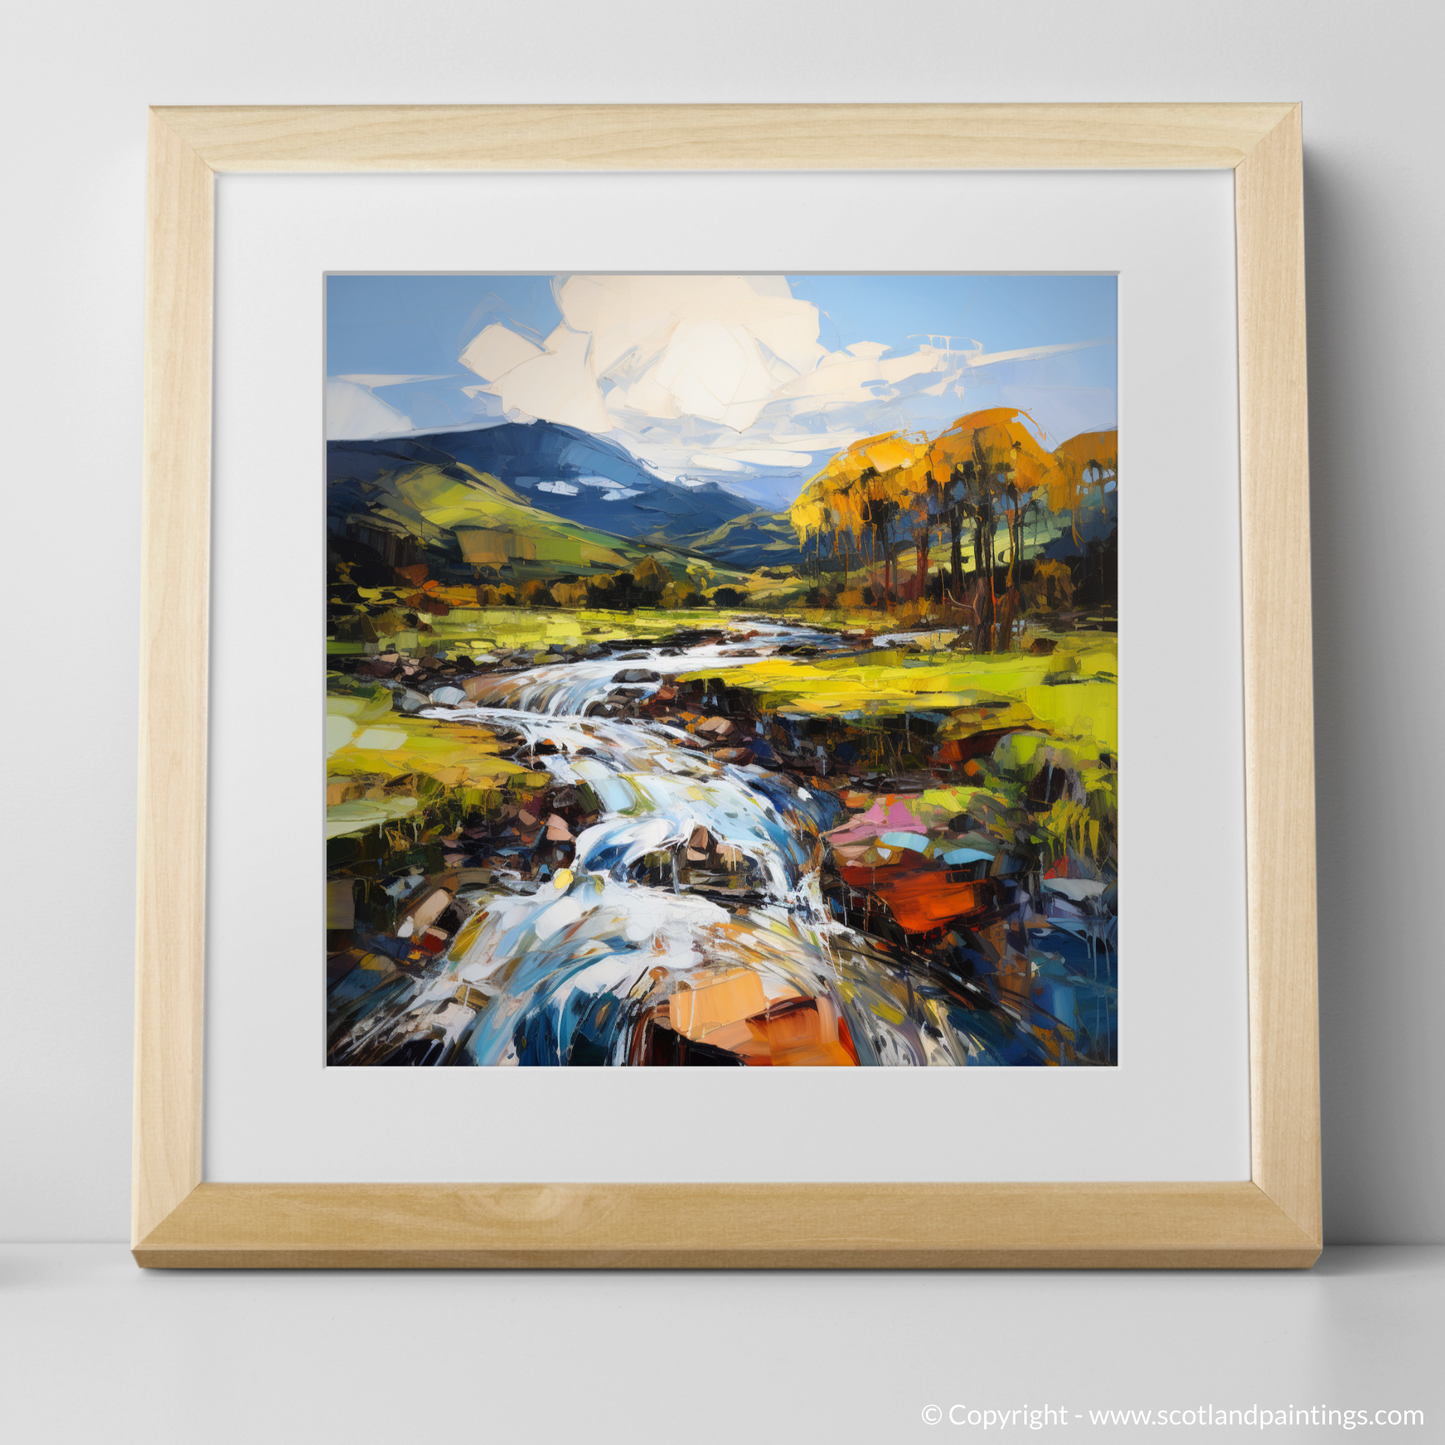 Art Print of River Carron, Ross-shire with a natural frame